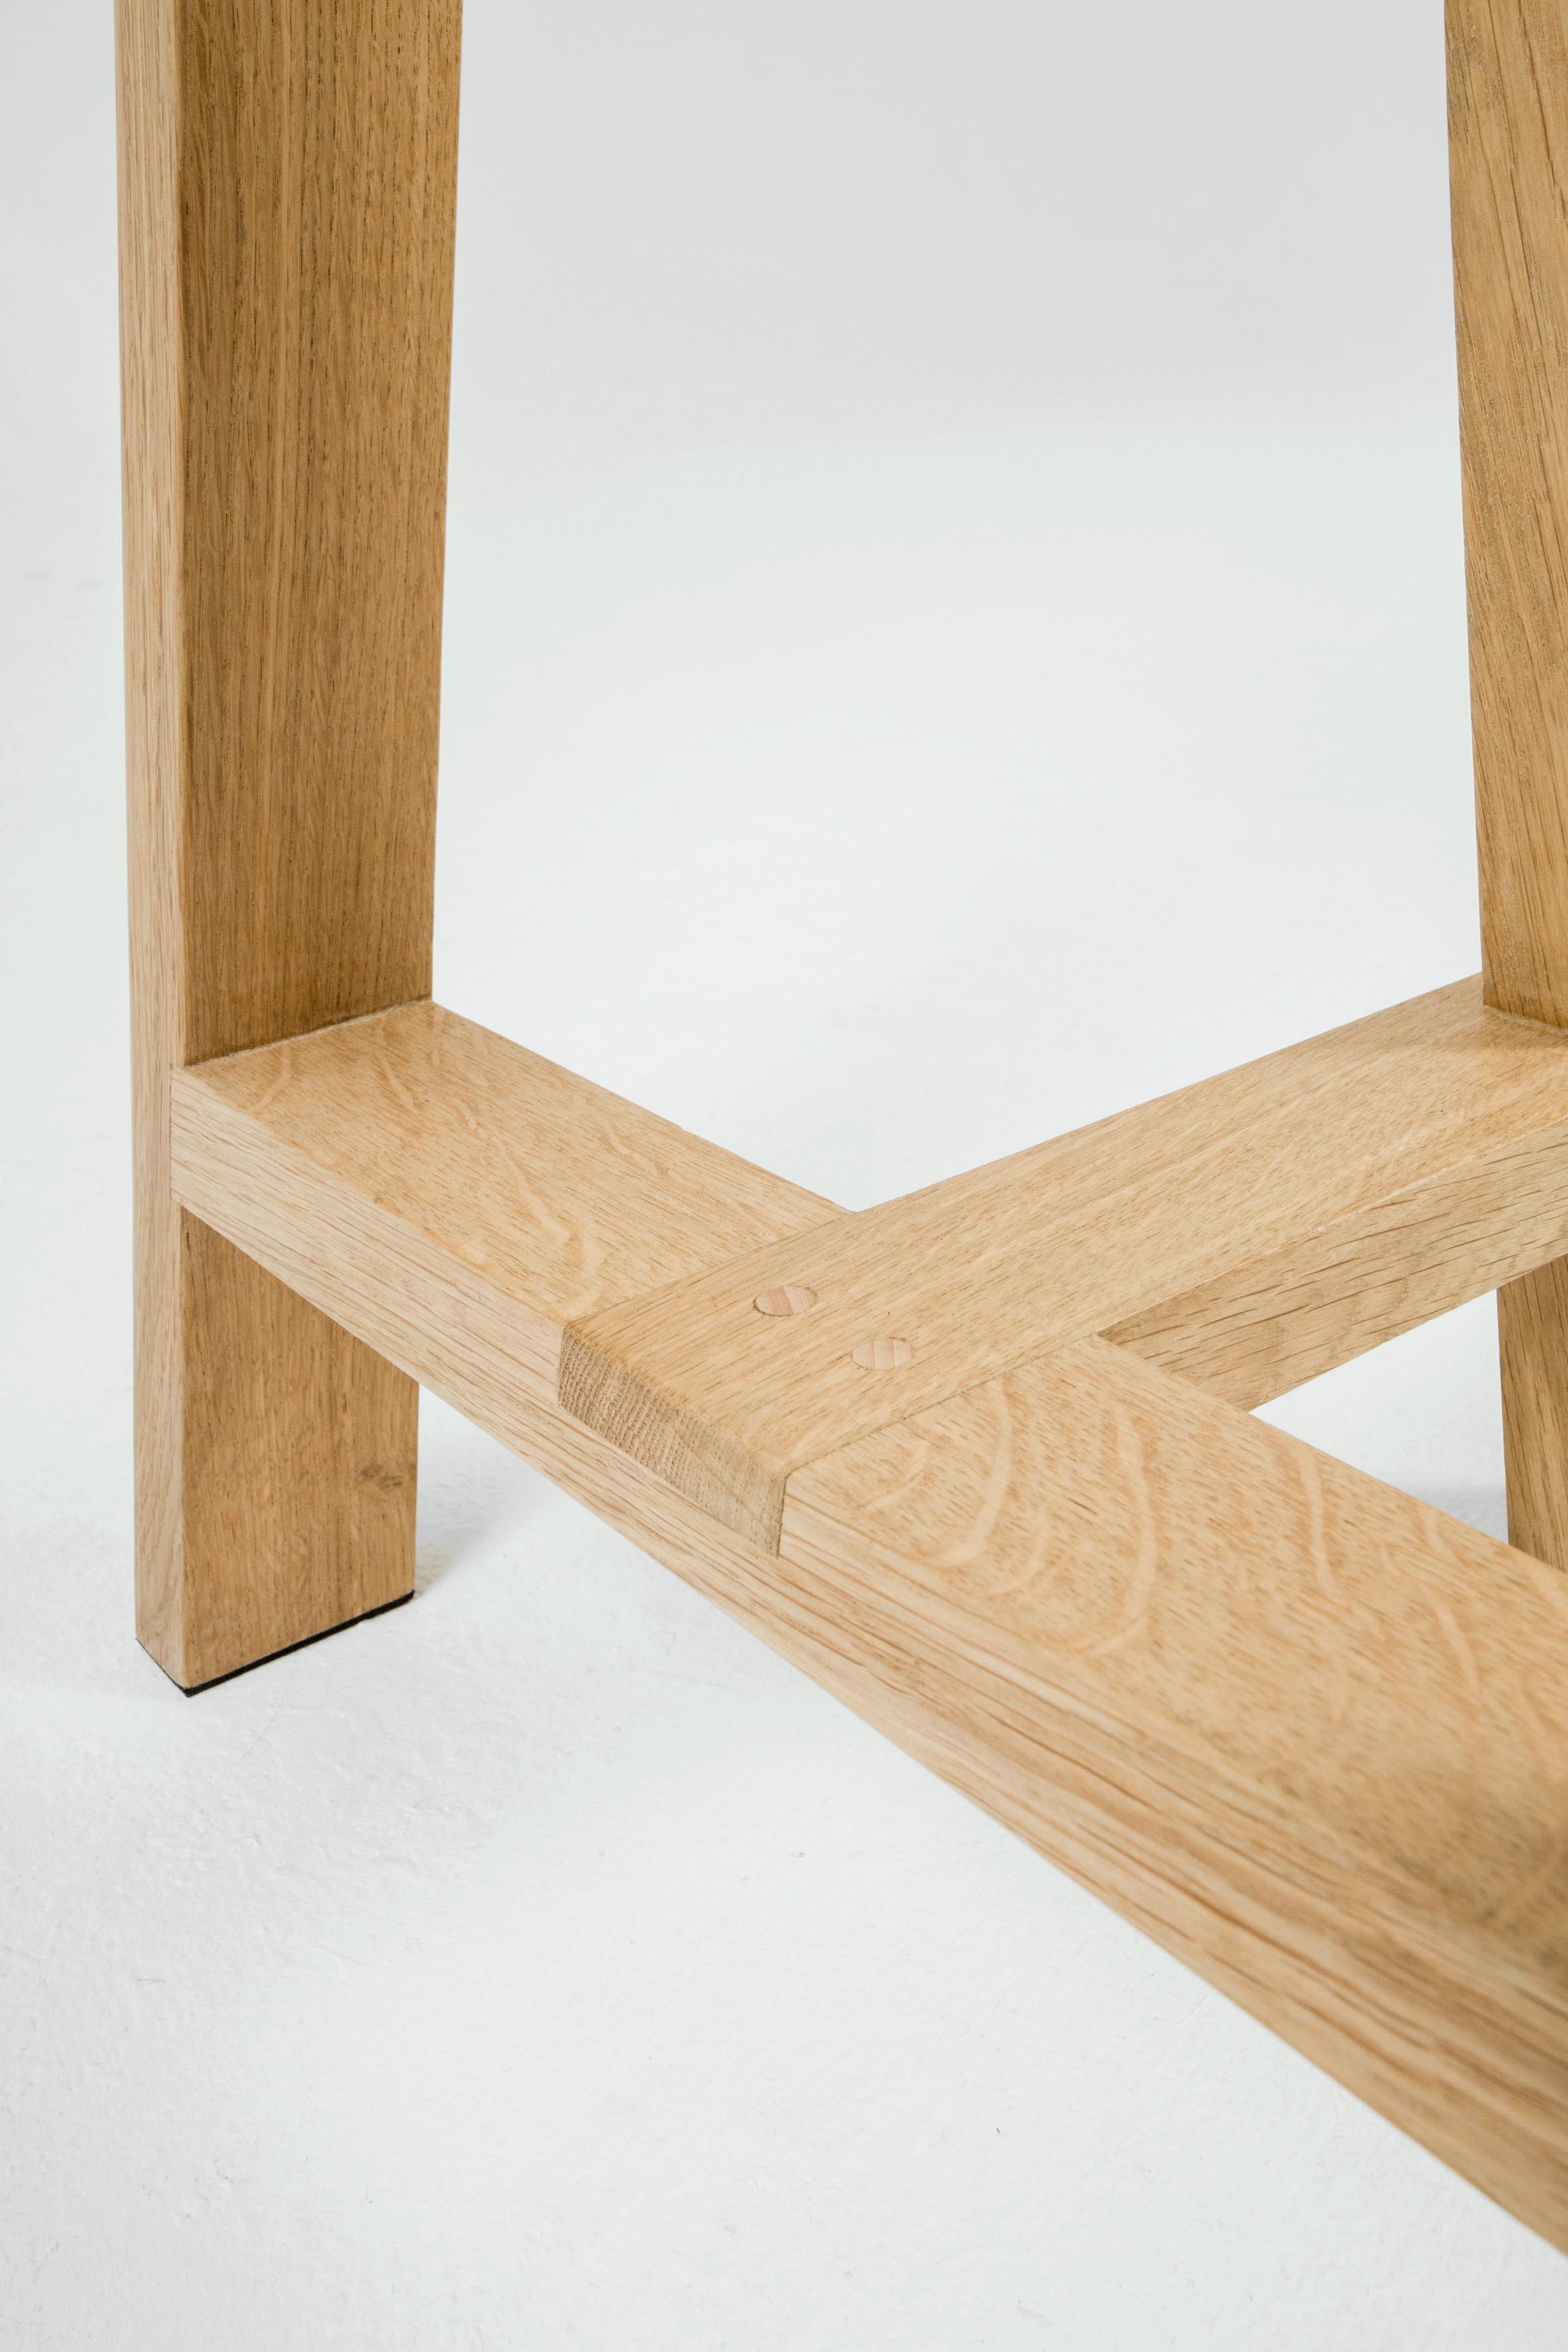 Other Set of 4 Small Pausa Oak Stool by Pierre-Emmanuel Vandeputte For Sale